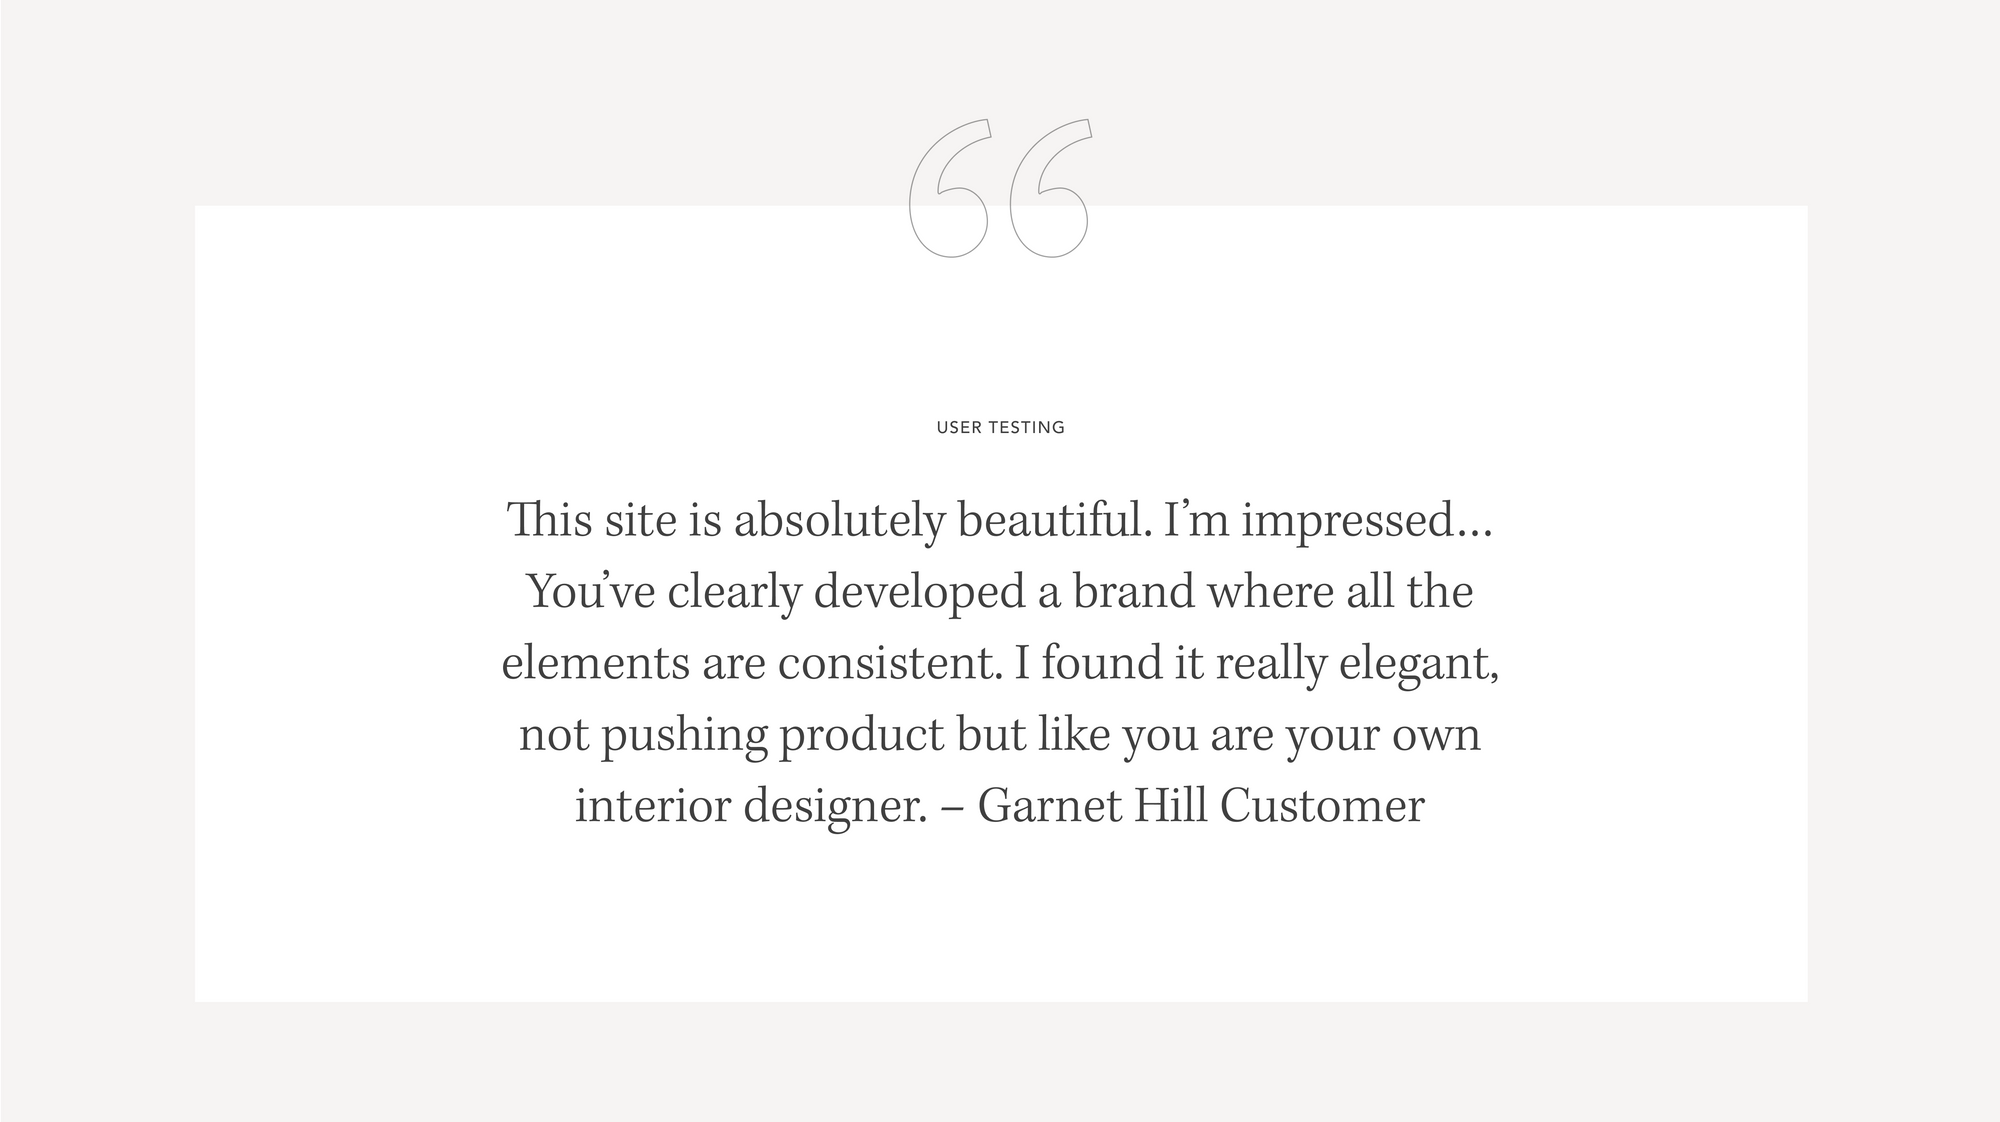 Quote from Garnet Hill customer - This site is absolutely beautiful. I'm impressed...You've clearly developed a brand where all the elements are consistent.